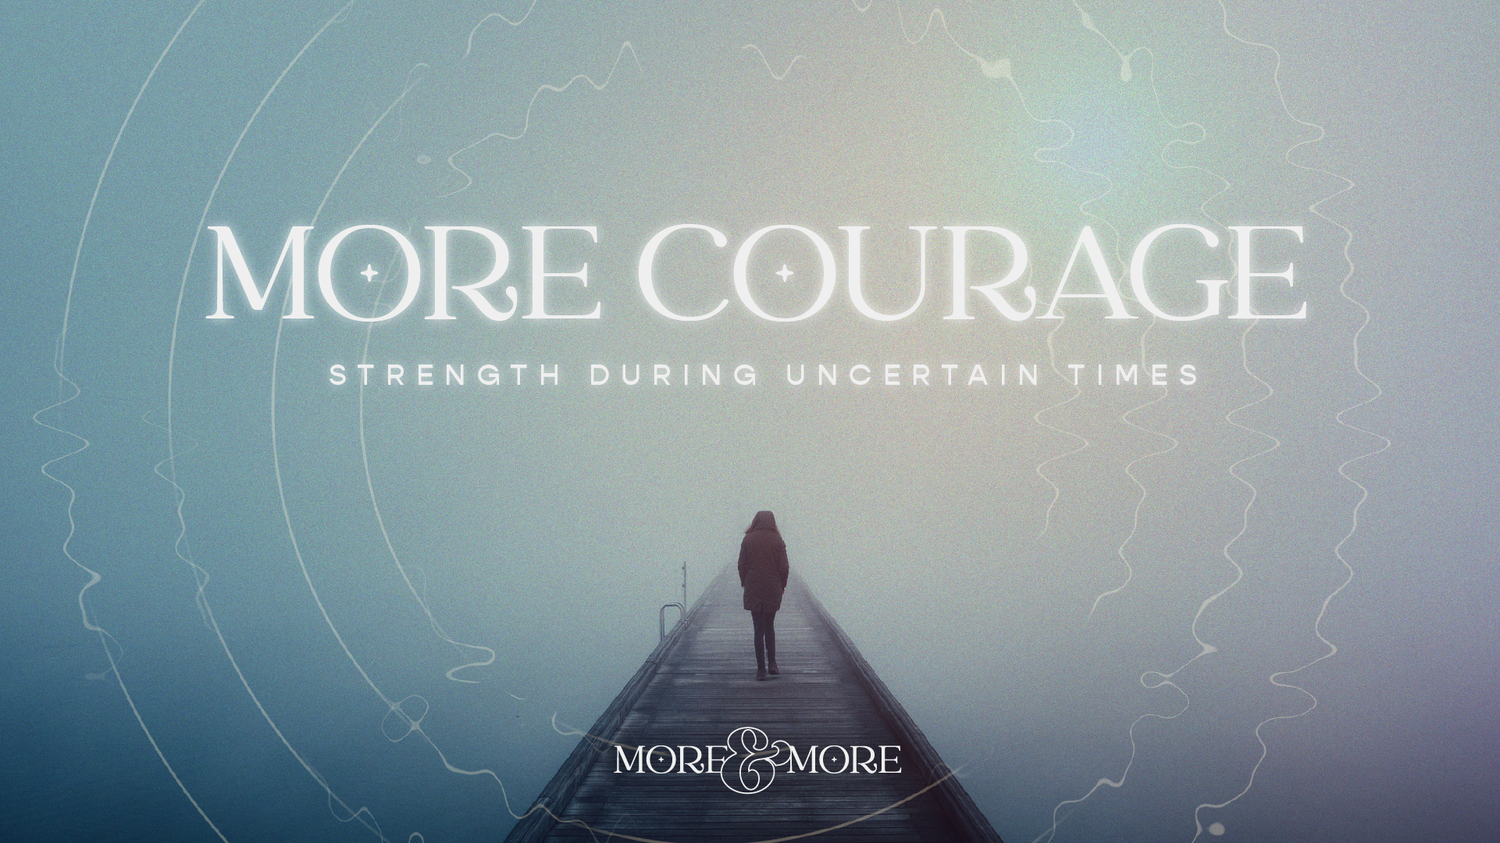 Courage to Overcome Opposition